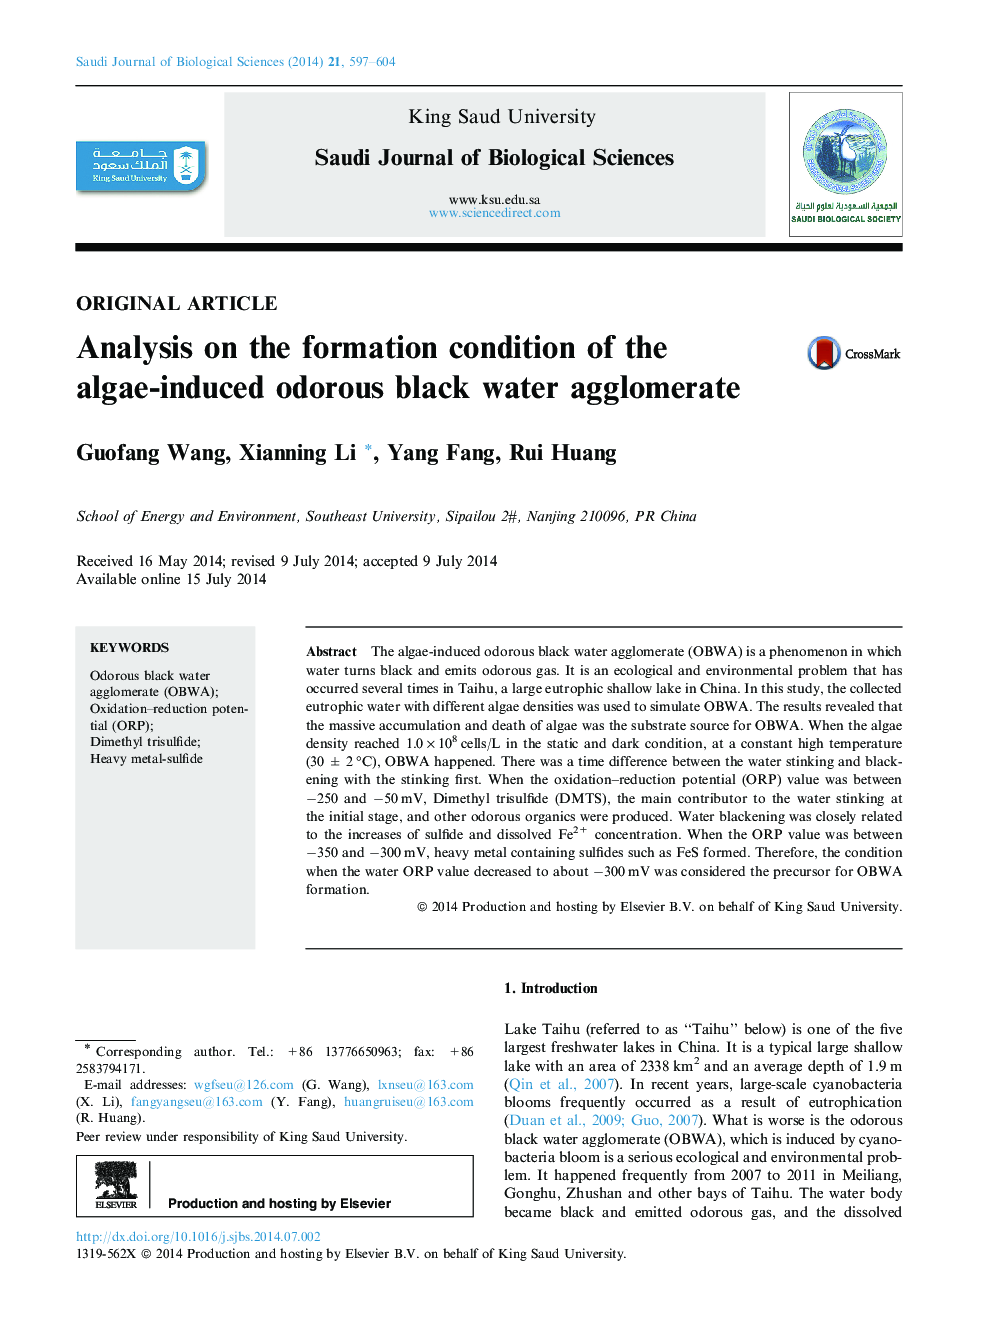 Analysis on the formation condition of the algae-induced odorous black water agglomerate 